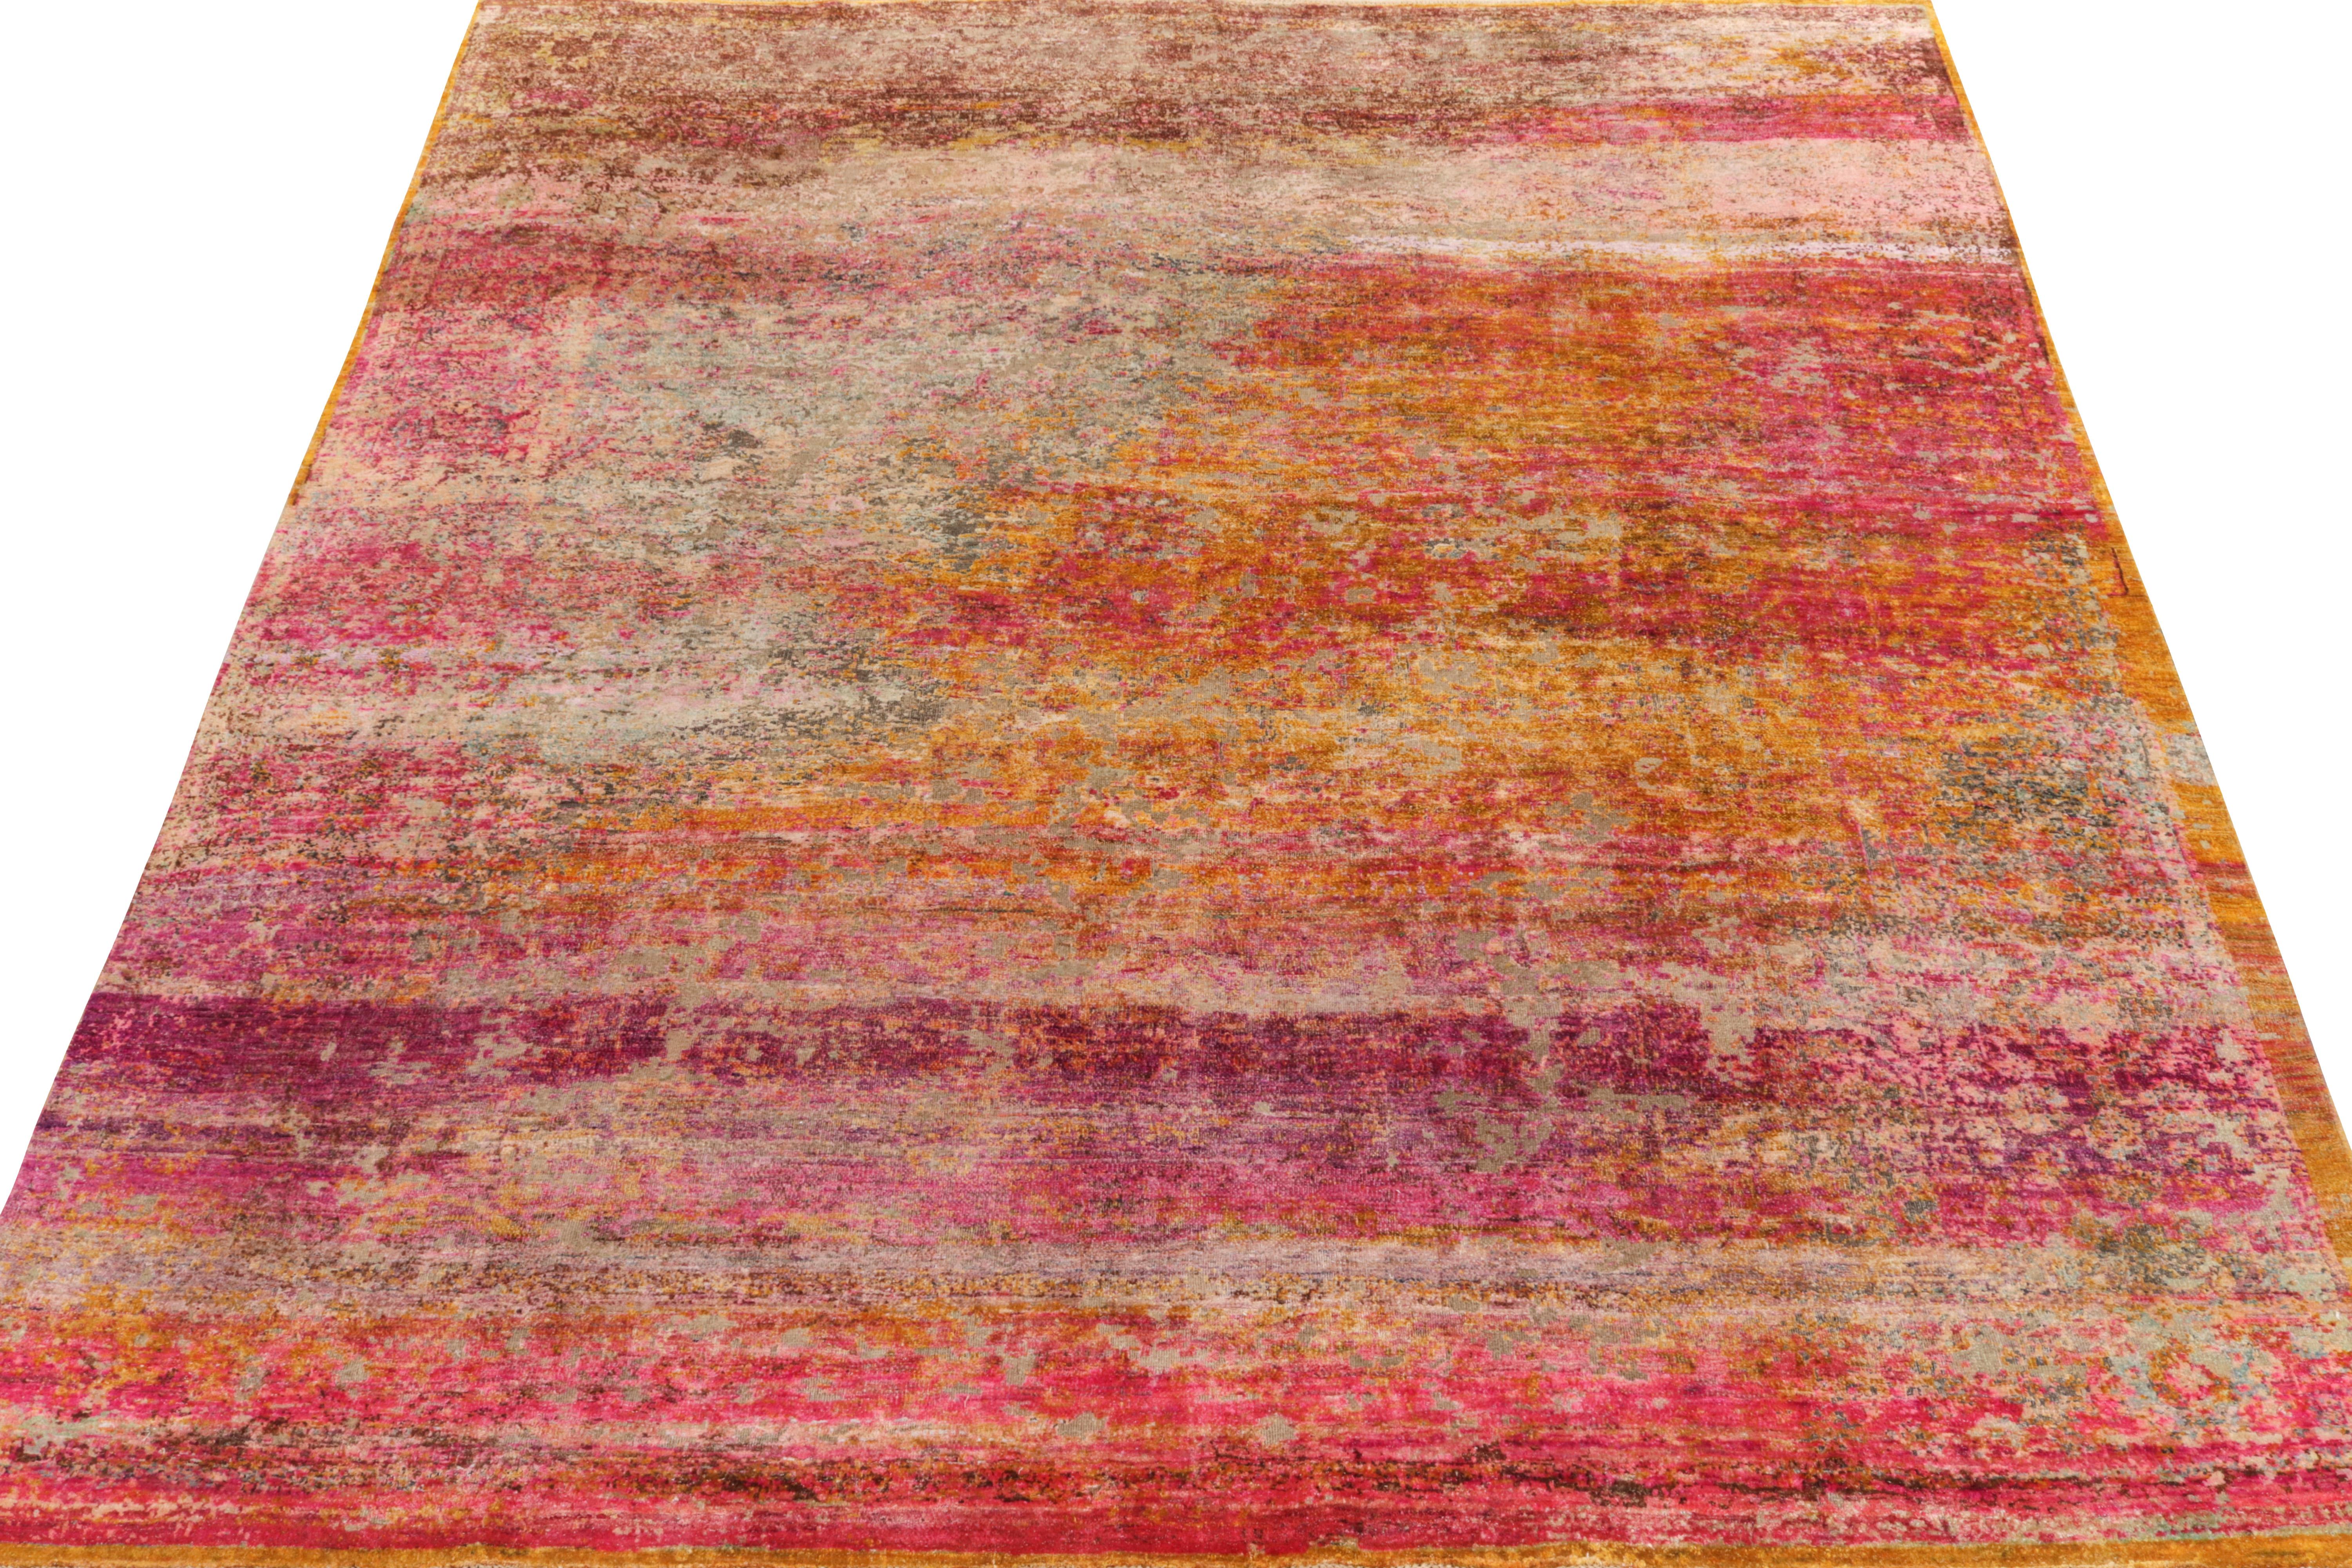 Hand-knotted in luxurious silk, an 8x10 abstract rug from our new and modern selections. Reimagining contemporary style in a delicious high low texture, the rug relishes vivacious hues of fuschia pink, gold, mustard, beige, brown & more—a delicious,